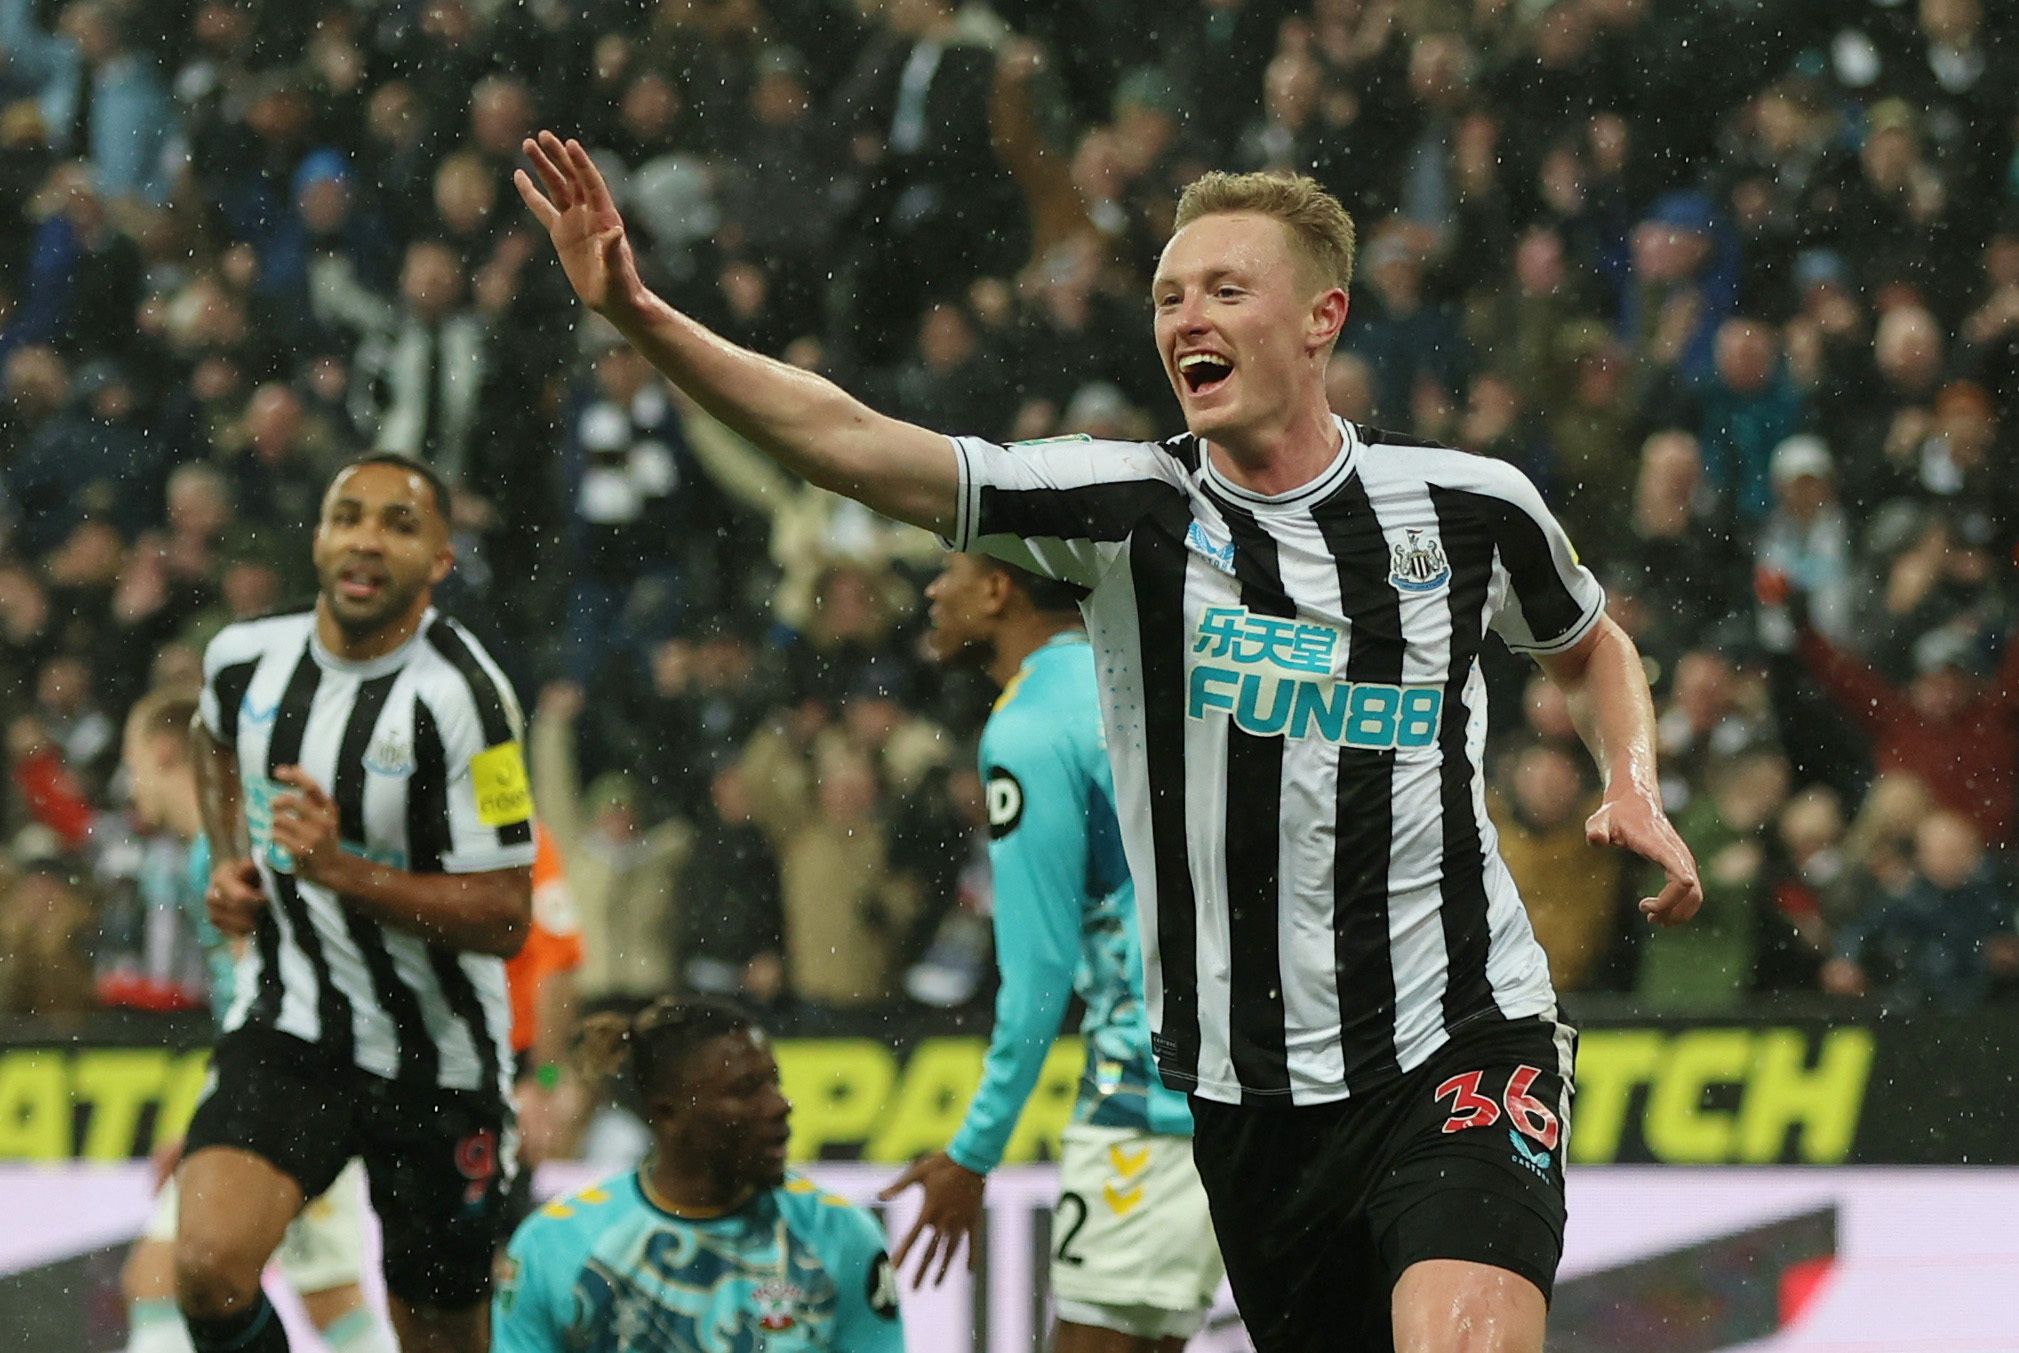 Soccer Football - Carabao Cup - Semi Final - Second Leg - Newcastle United v Southampton - St James' Park, Newcastle, Britain - January 31, 2023 Newcastle United's Sean Longstaff celebrates scoring their second goal Action Images via Reuters/Lee Smith EDITORIAL USE ONLY. No use with unauthorized audio, video, data, fixture lists, club/league logos or 'live' services. Online in-match use limited to 75 images, no video emulation. No use in betting, games or single club /league/player publications.